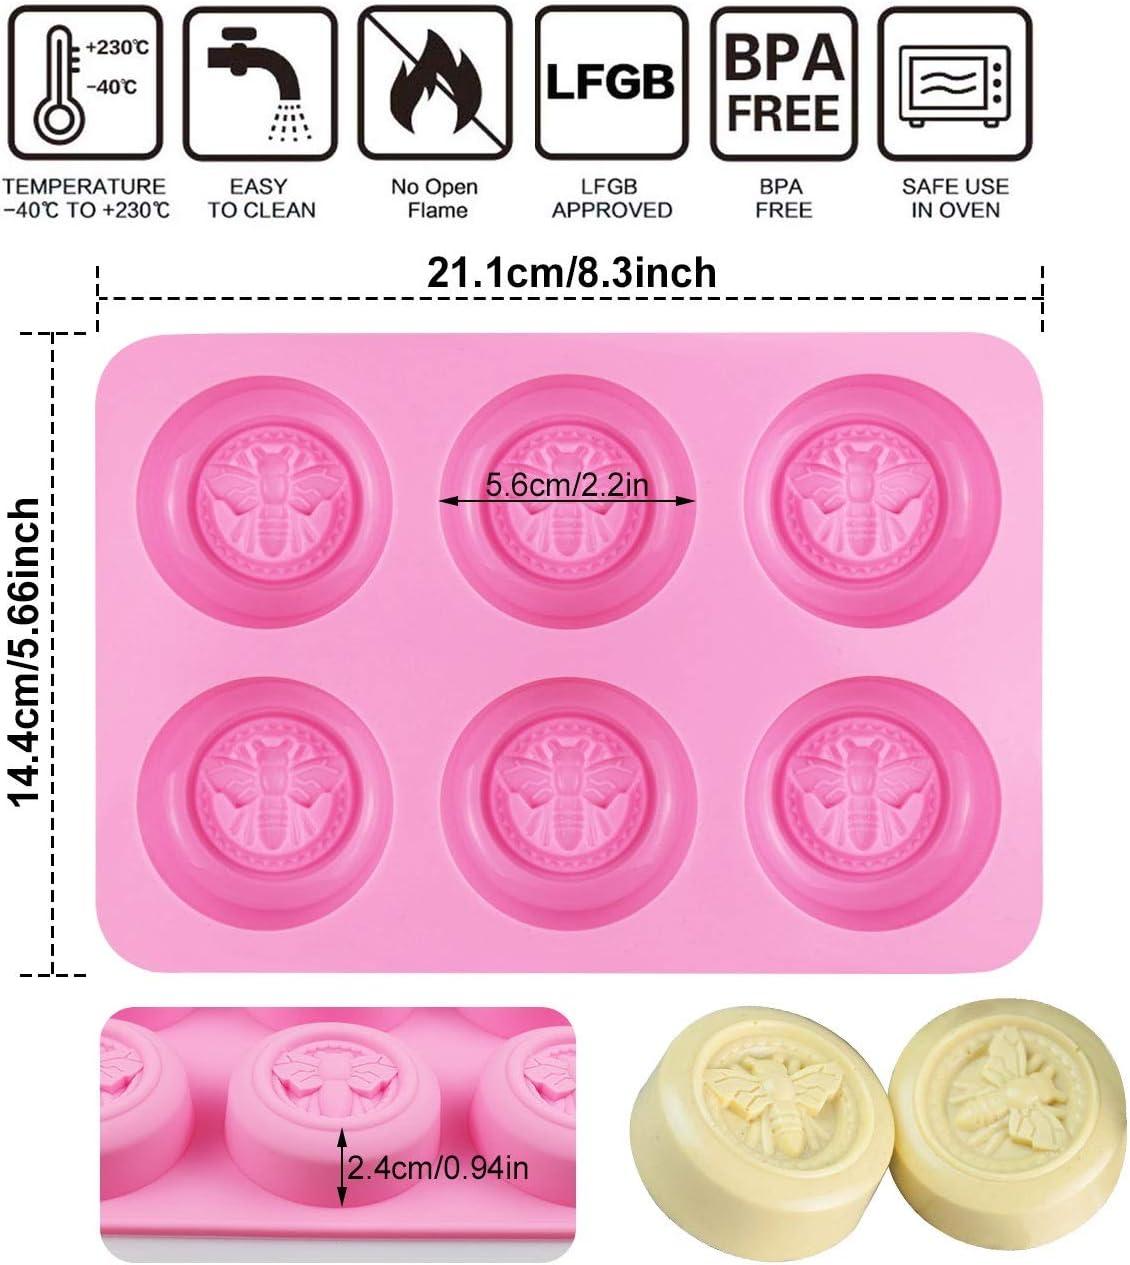 Sakolla Bee Silicone Molds - Round Honeybee Silicone Molds for Homemade Soaps, Lotion Bar, Jello, Bath Bomb, Beeswax, Resin, Chocolate and Dessert (Pink)